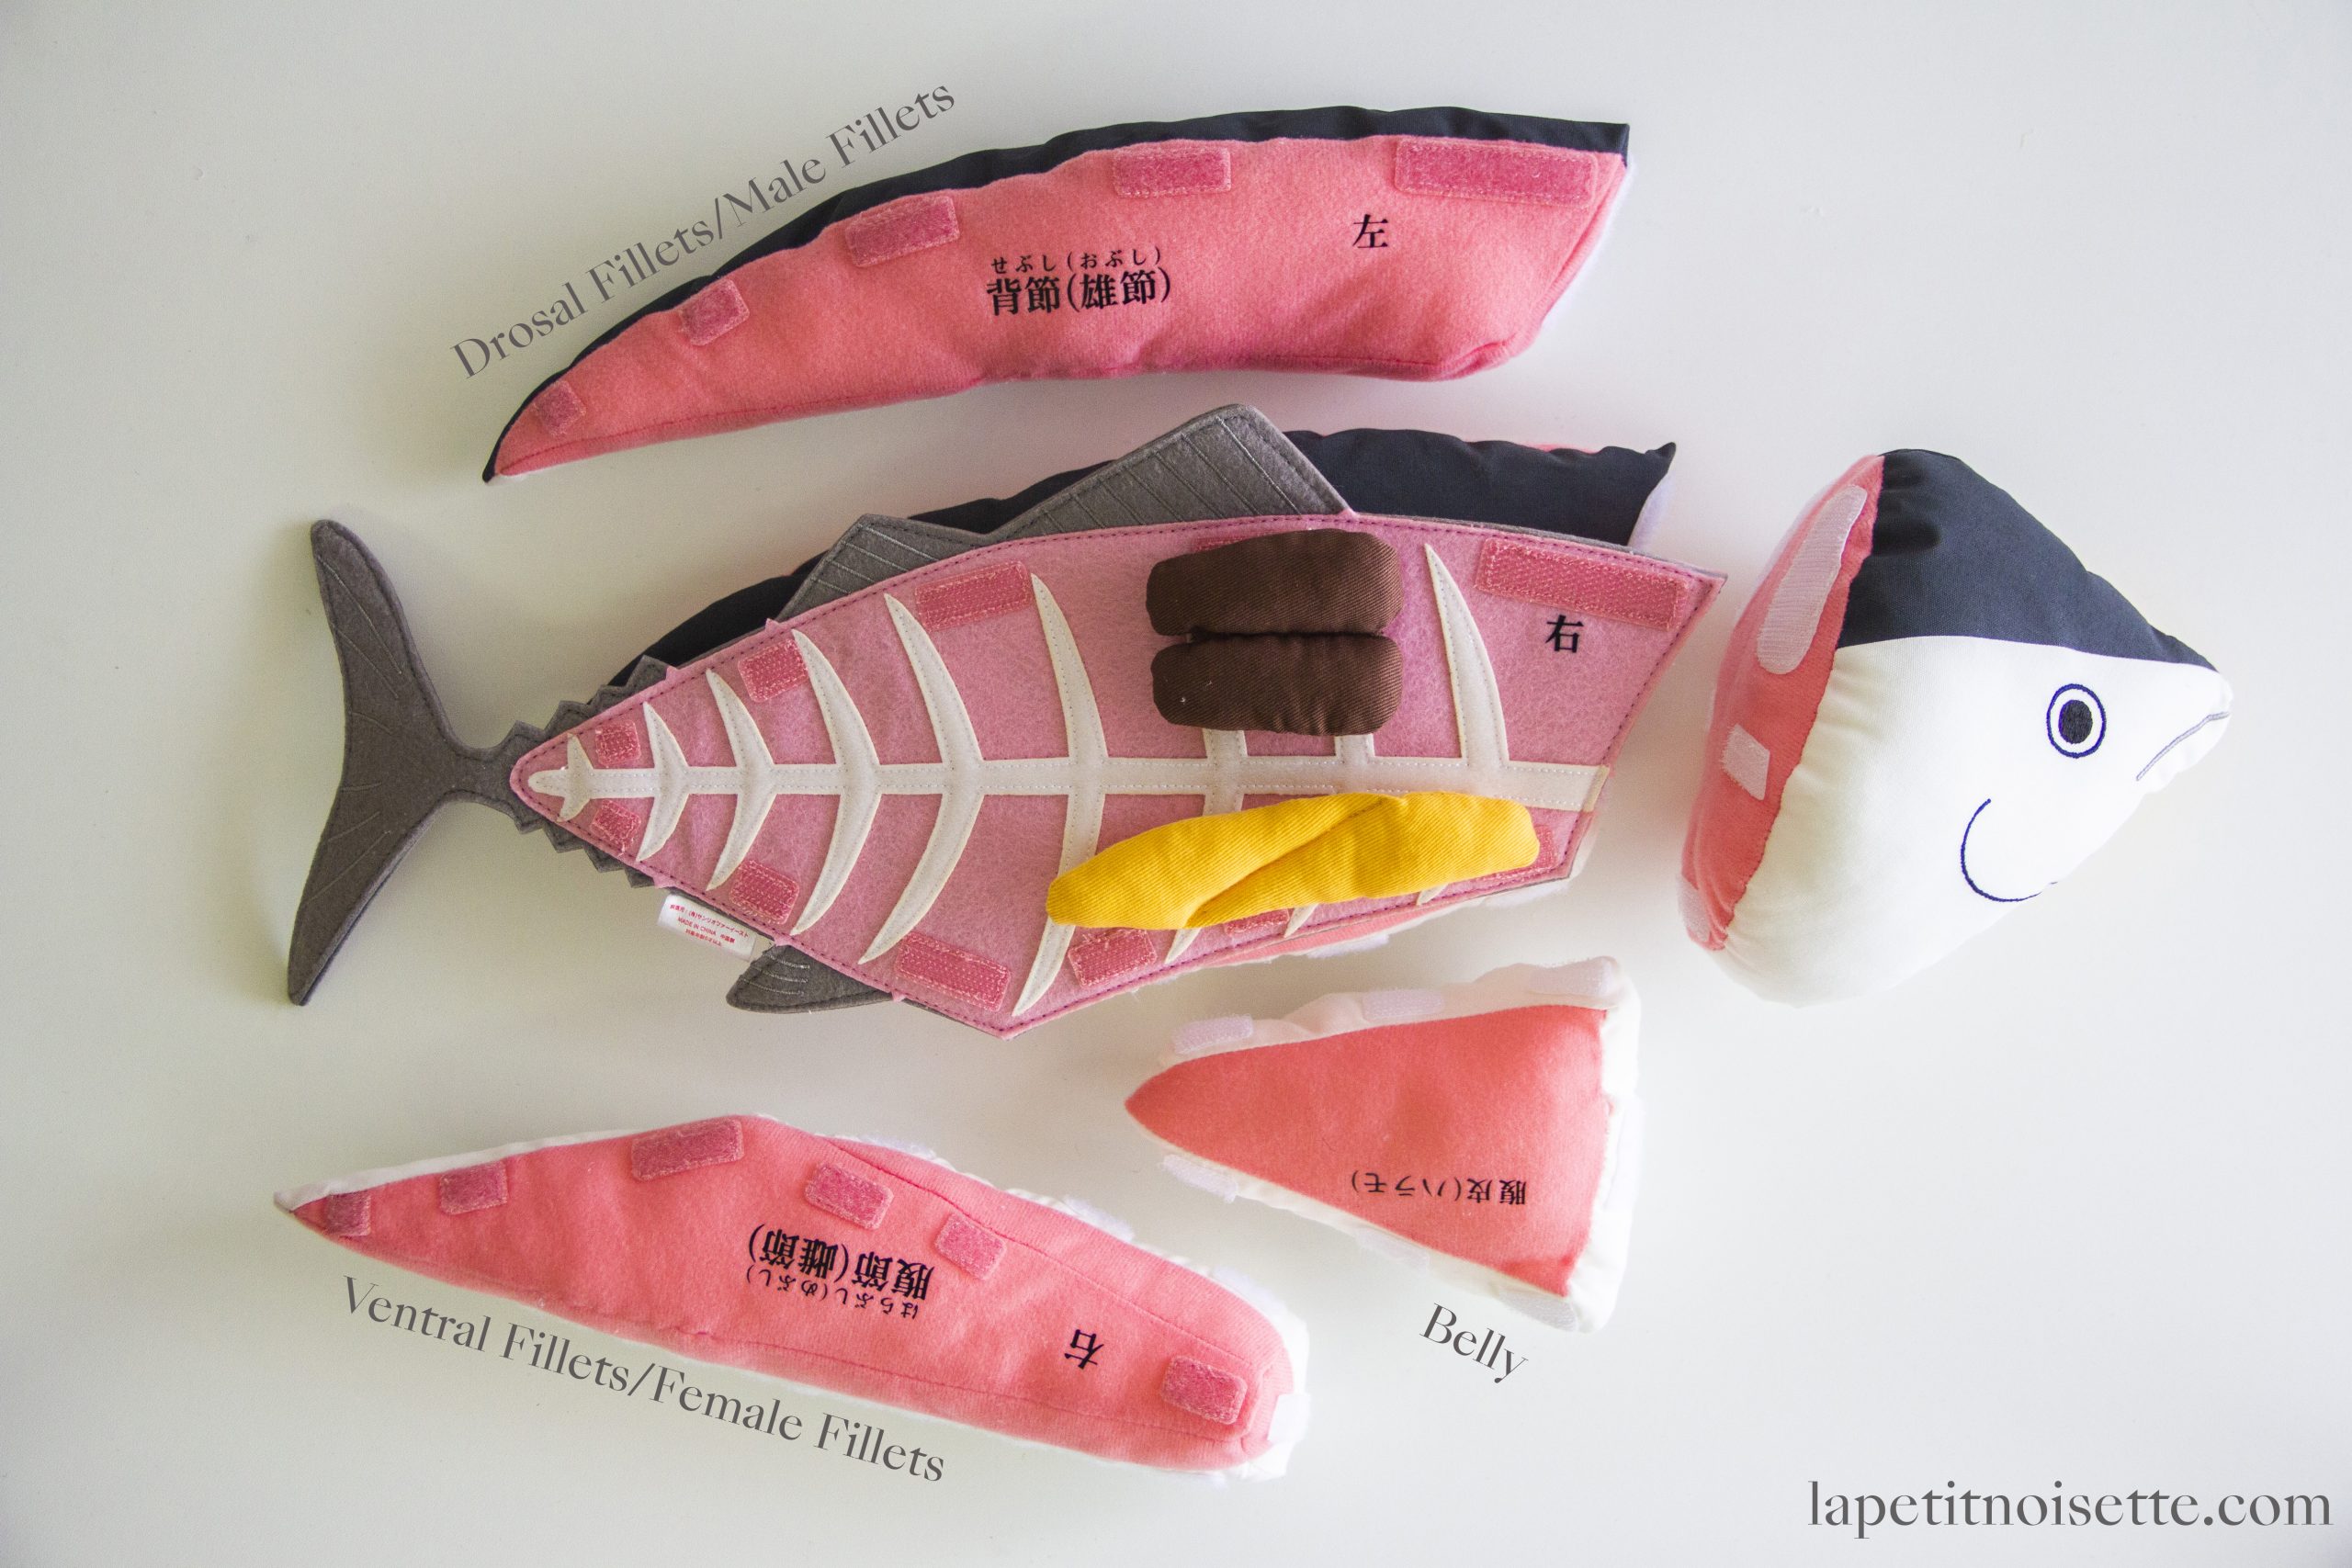 A doll showing the different parts and organs of a Japanese Katsuo skipjack tuna.